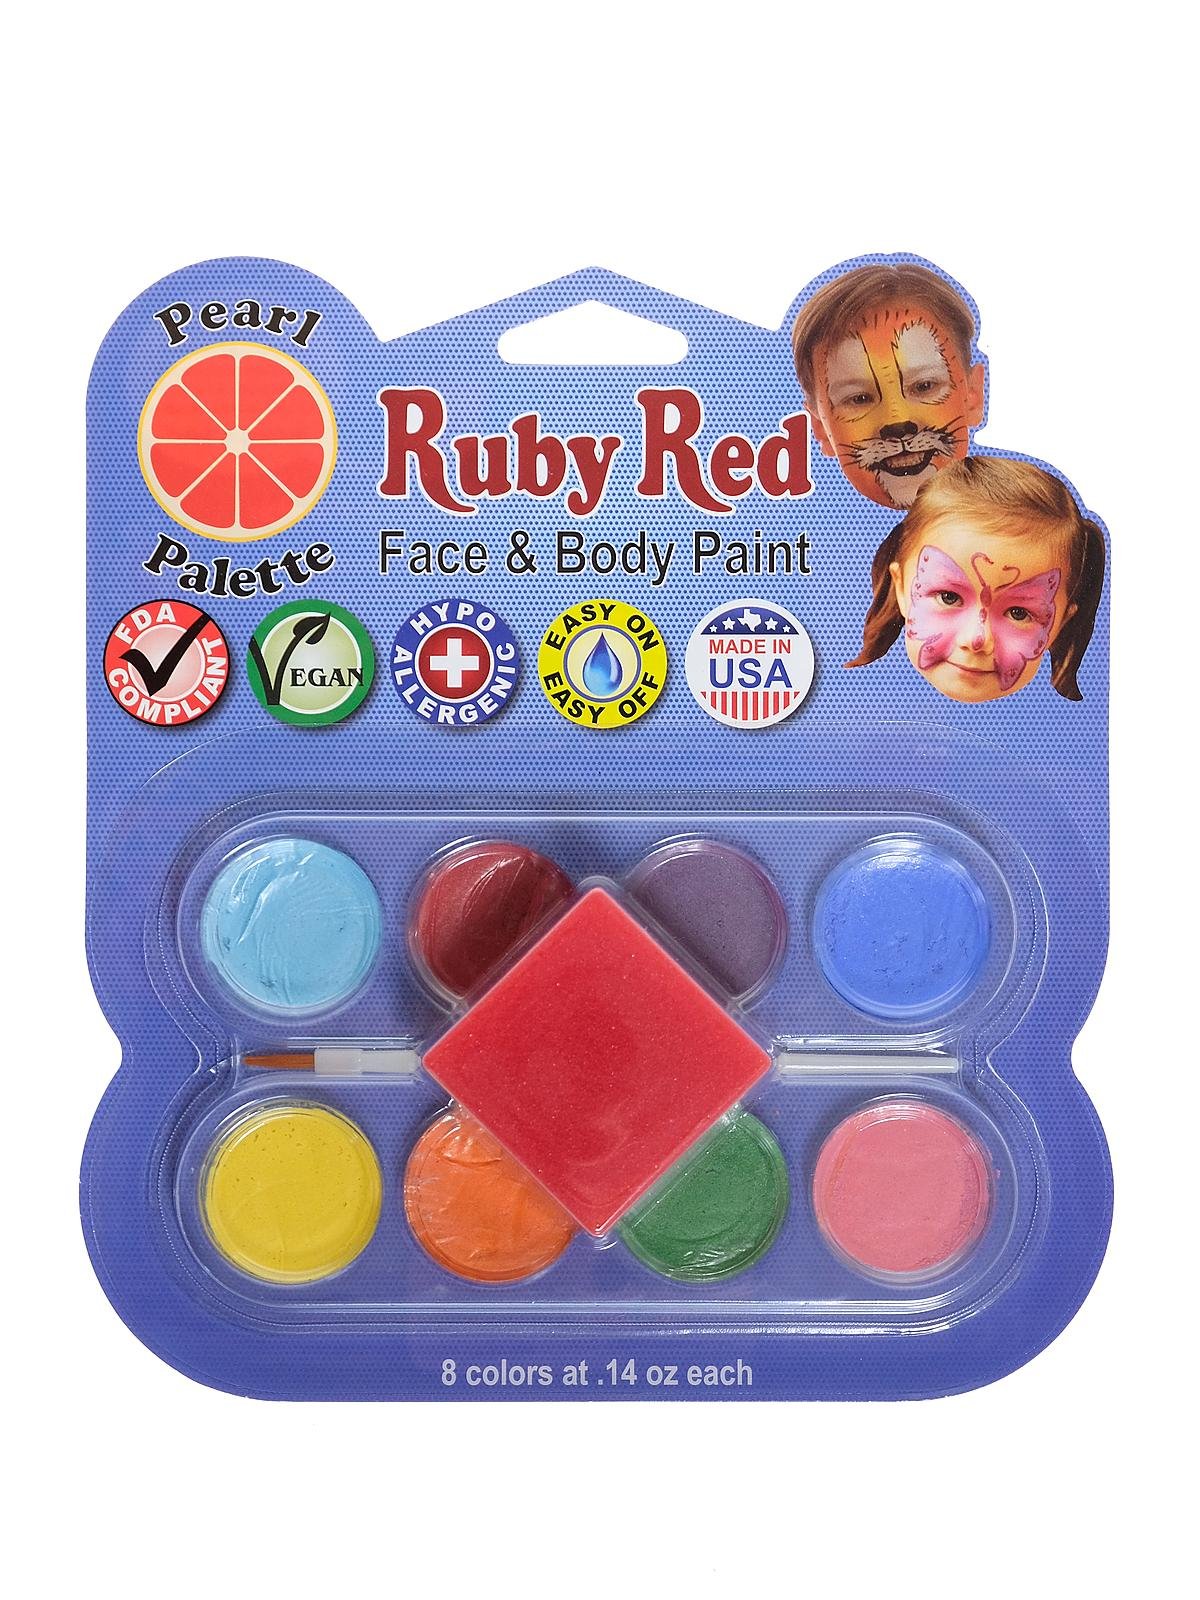 Ruby Red Face & Body Paint - Palette Sets